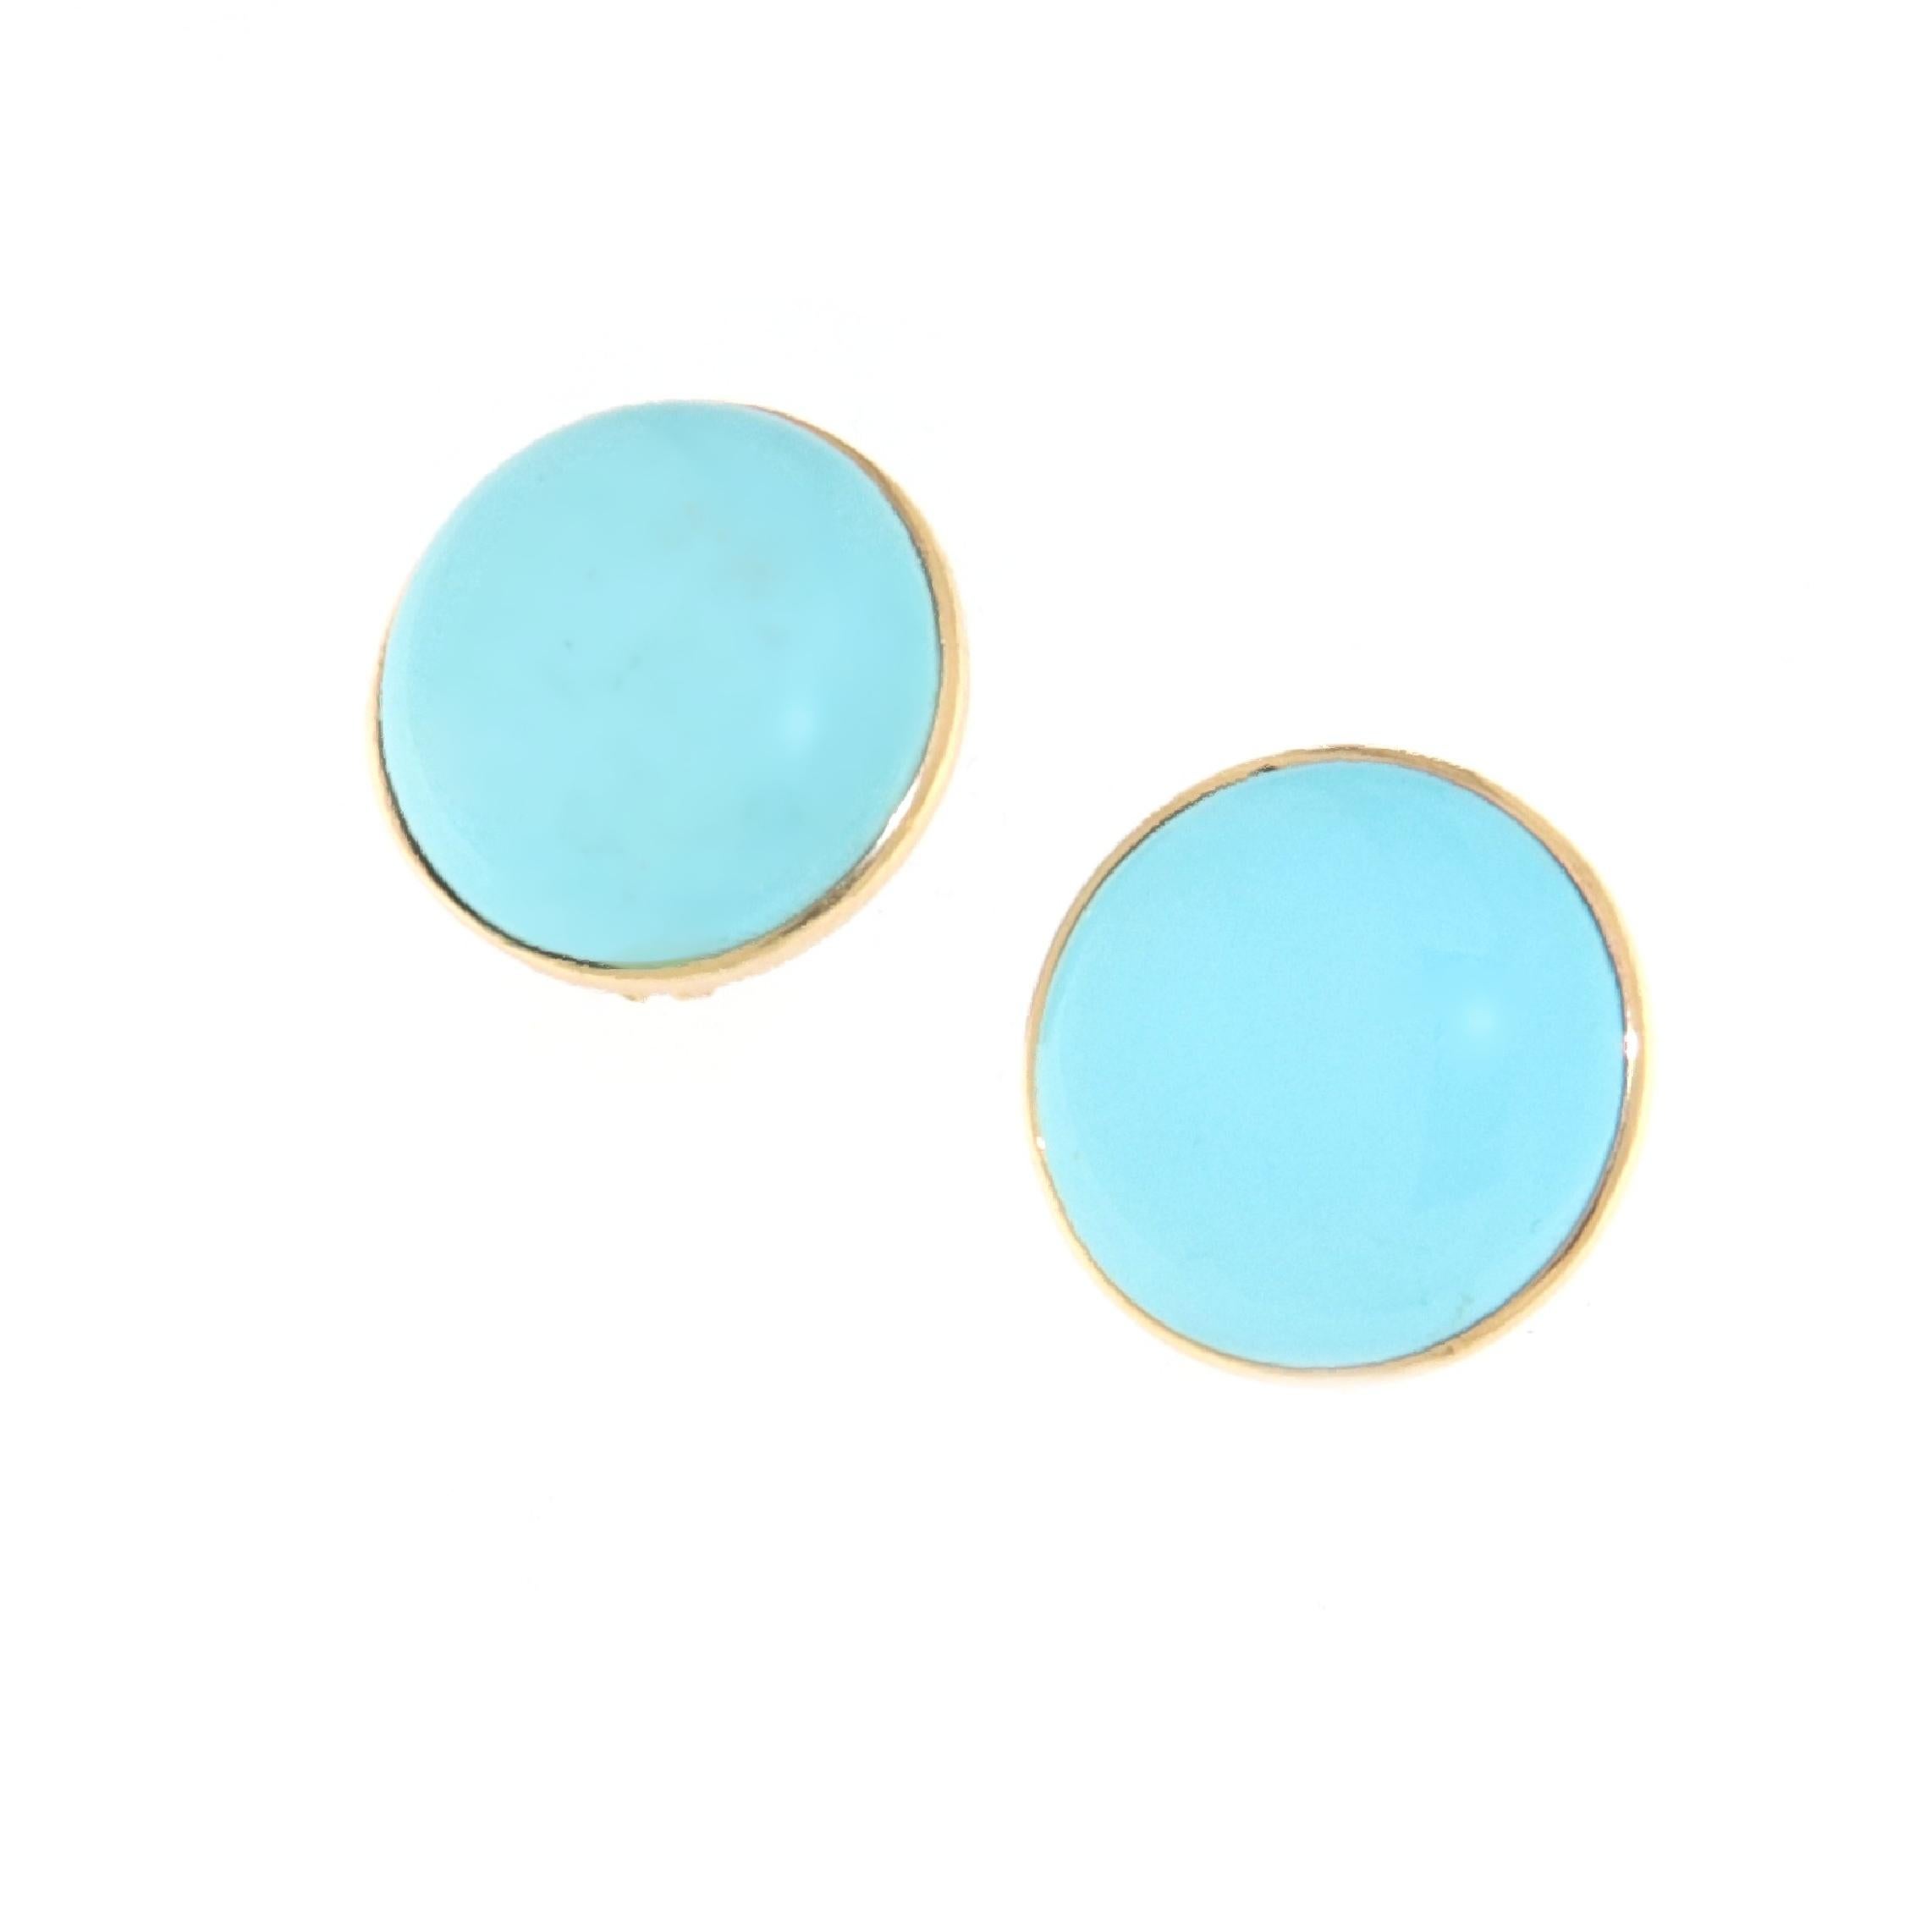 These classic 14-karat yellow gold earrings exude timeless elegance with their simple yet stunning design. Each earring features a smooth, rounded button of natural Arizona turquoise, celebrated for its exquisite sky-blue hue. The turquoise is